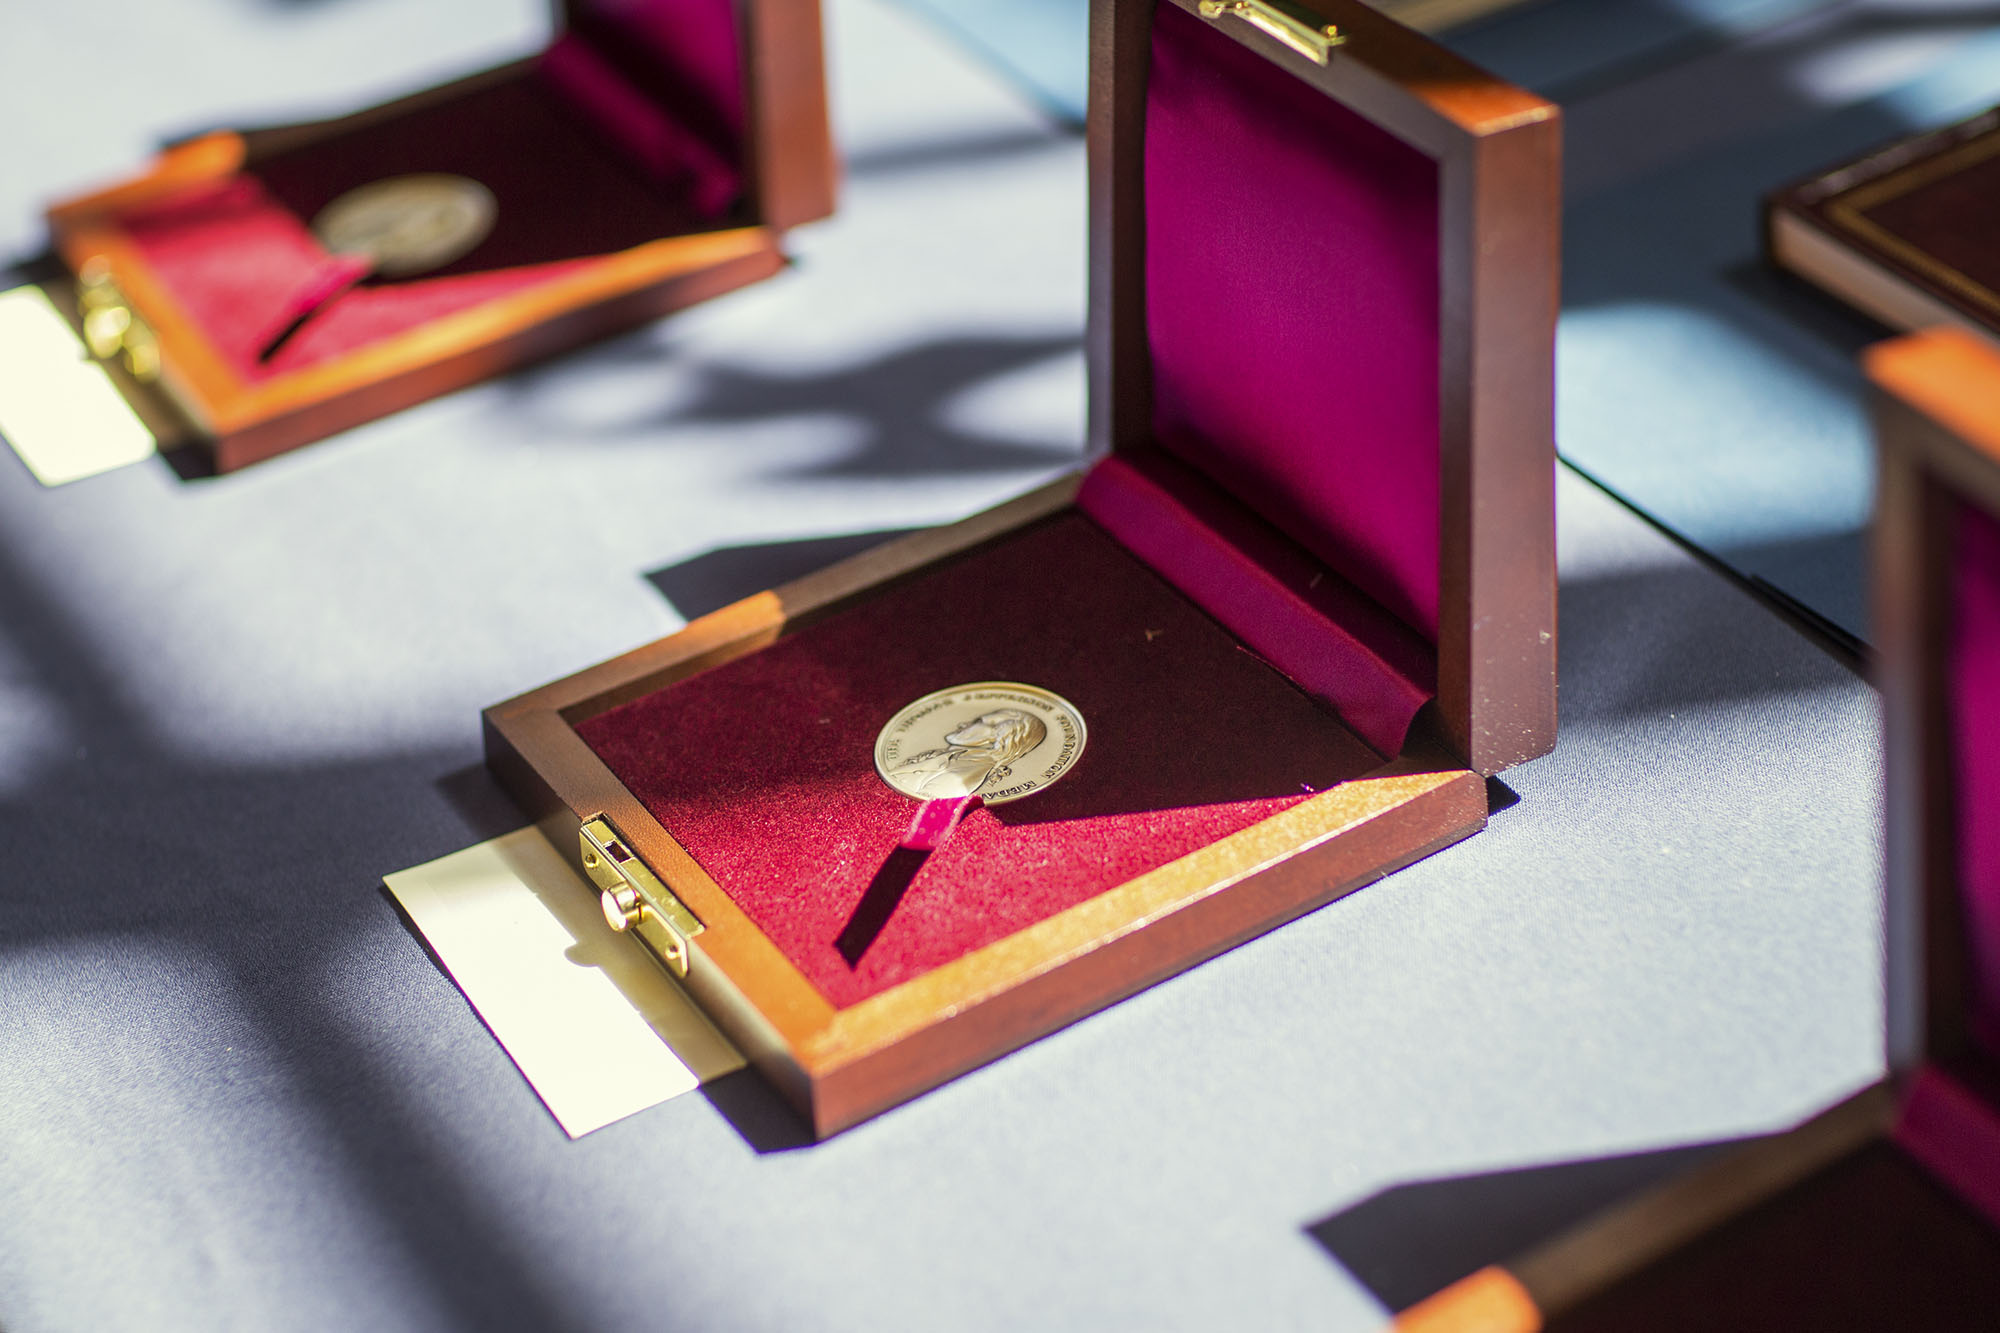 Thomas Jefferson Foundation Medals  in wooden box